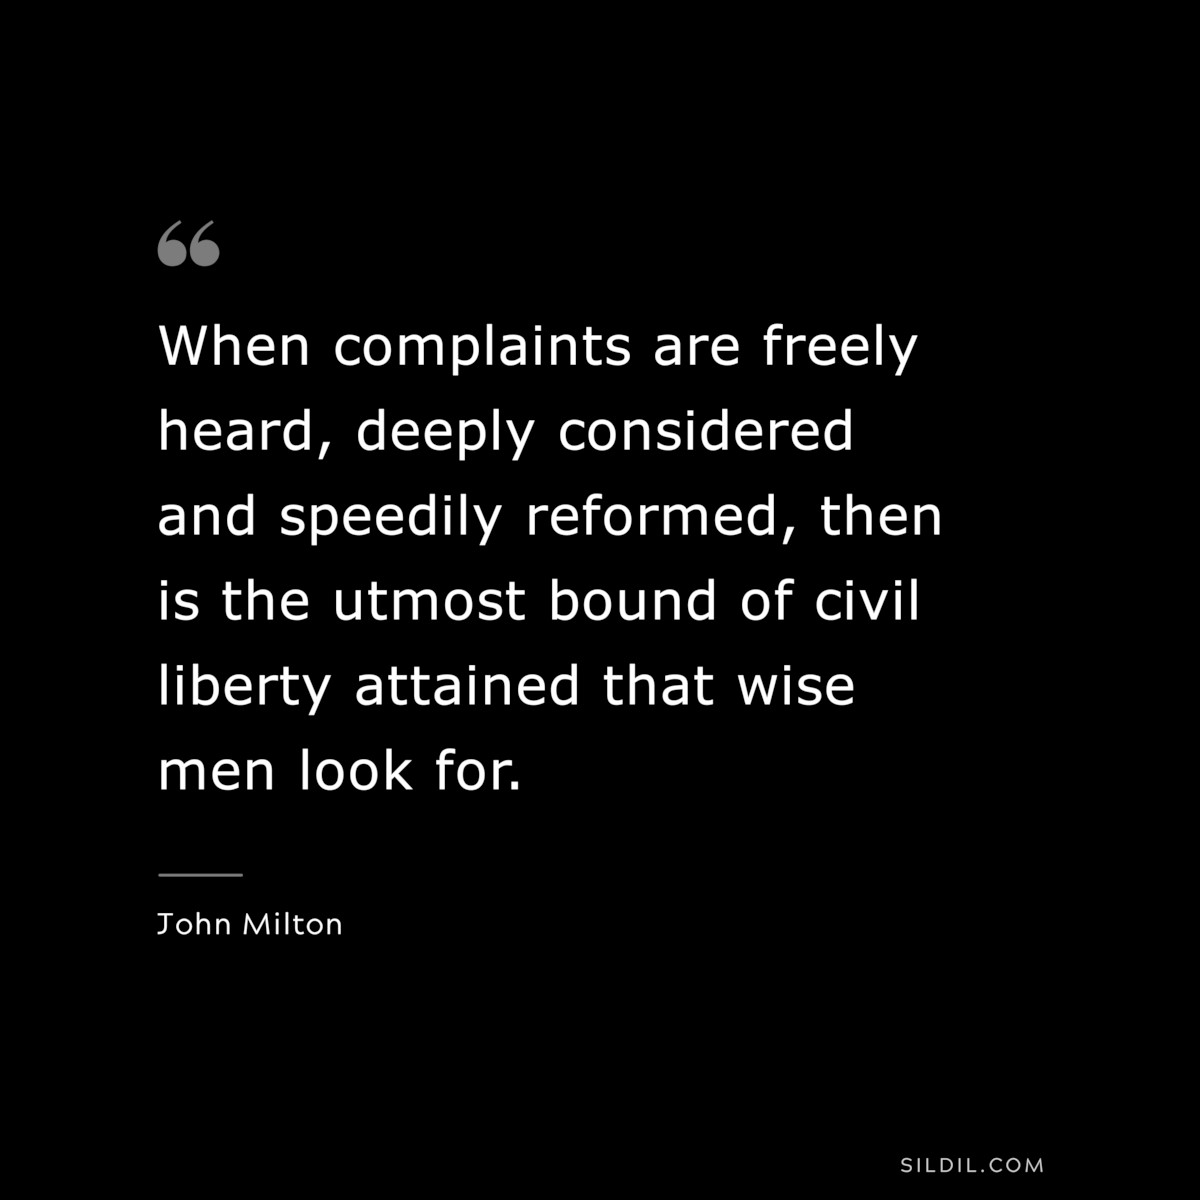 When complaints are freely heard, deeply considered and speedily reformed, then is the utmost bound of civil liberty attained that wise men look for. ― John Milton